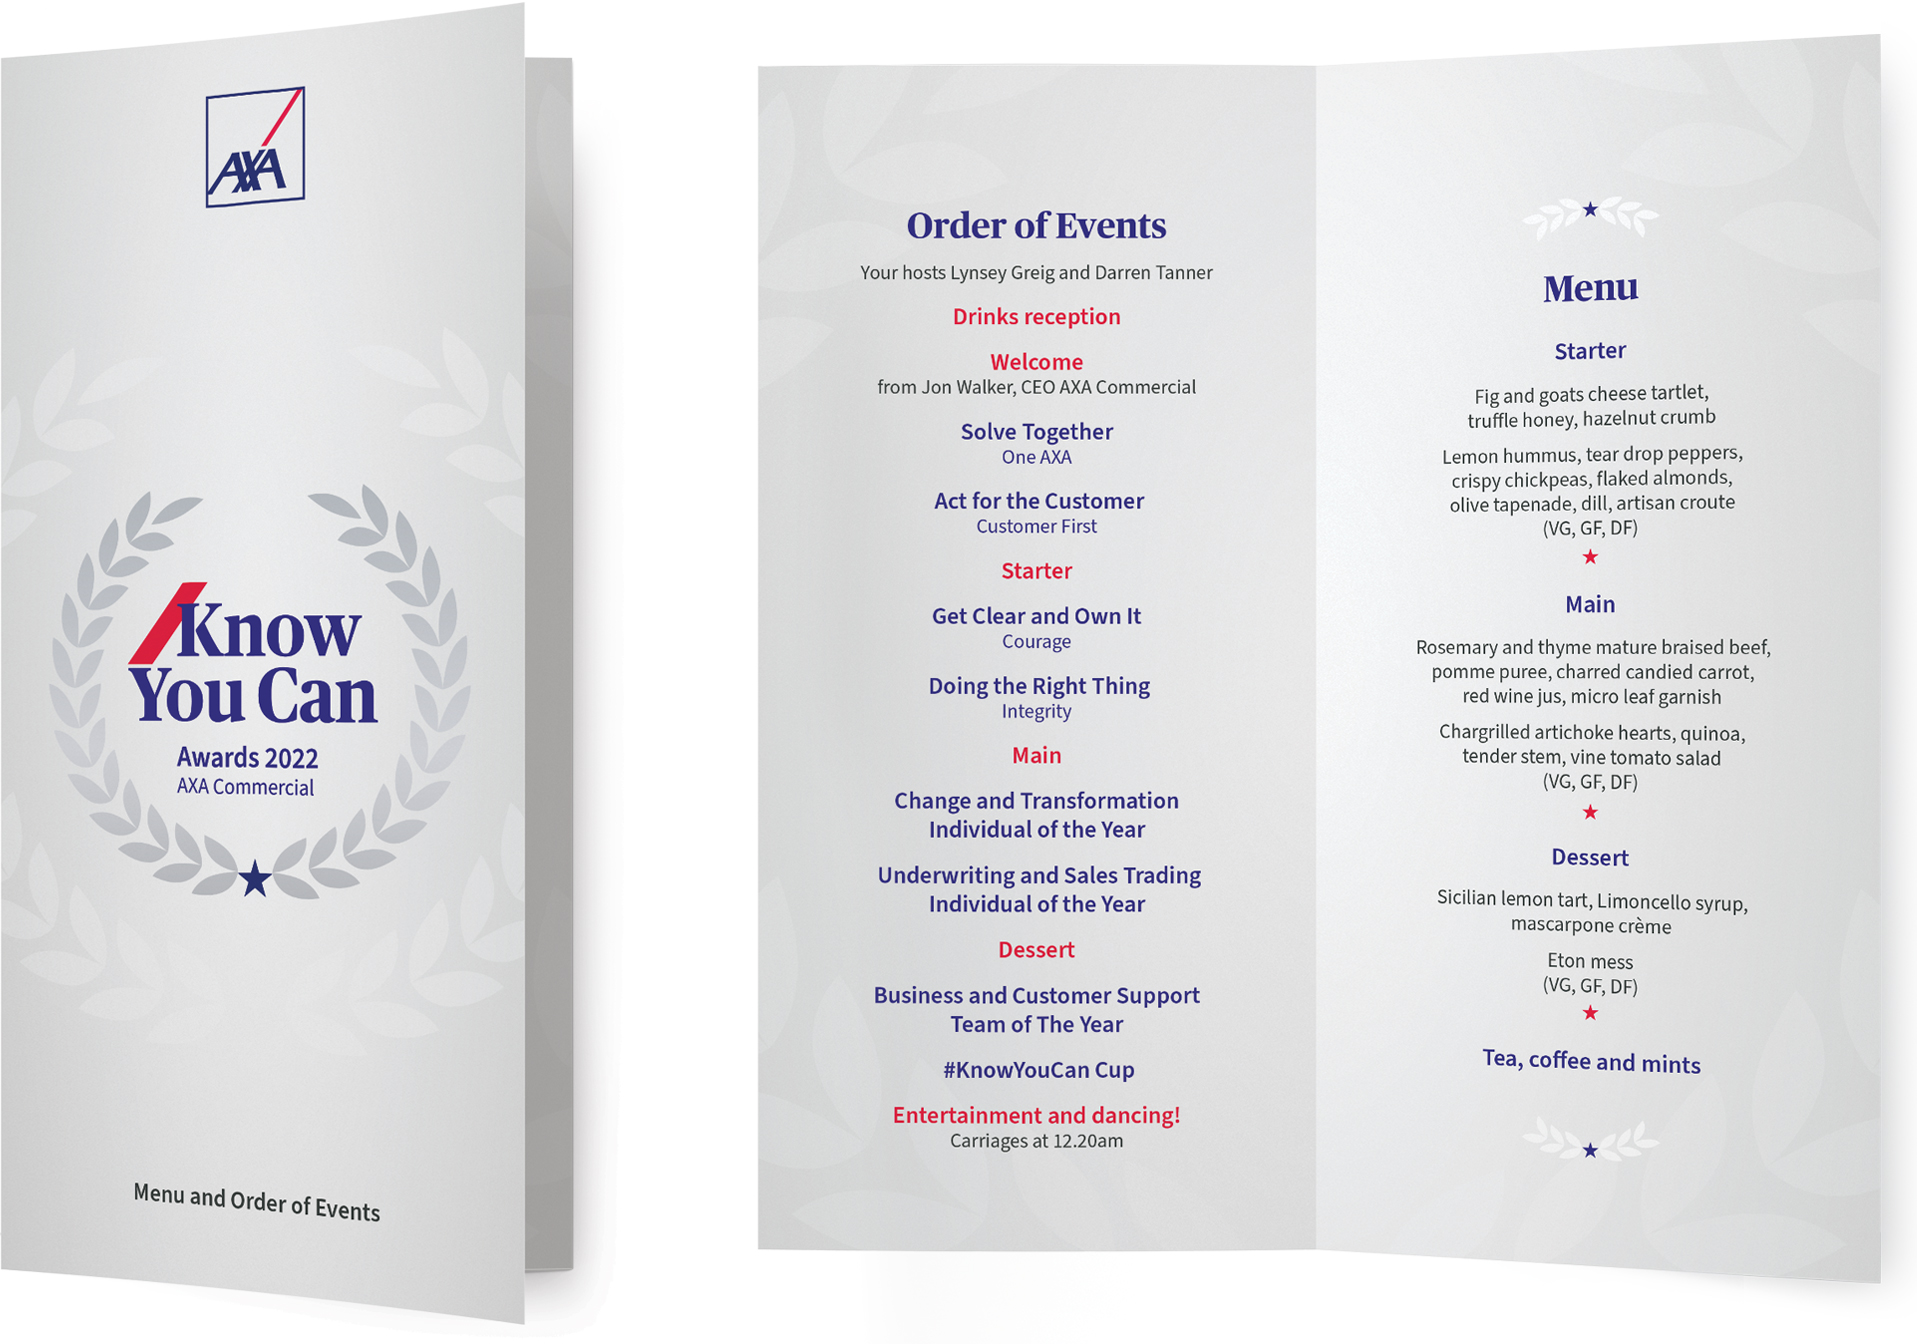 Know You Can Awards 2022 – running order and menu